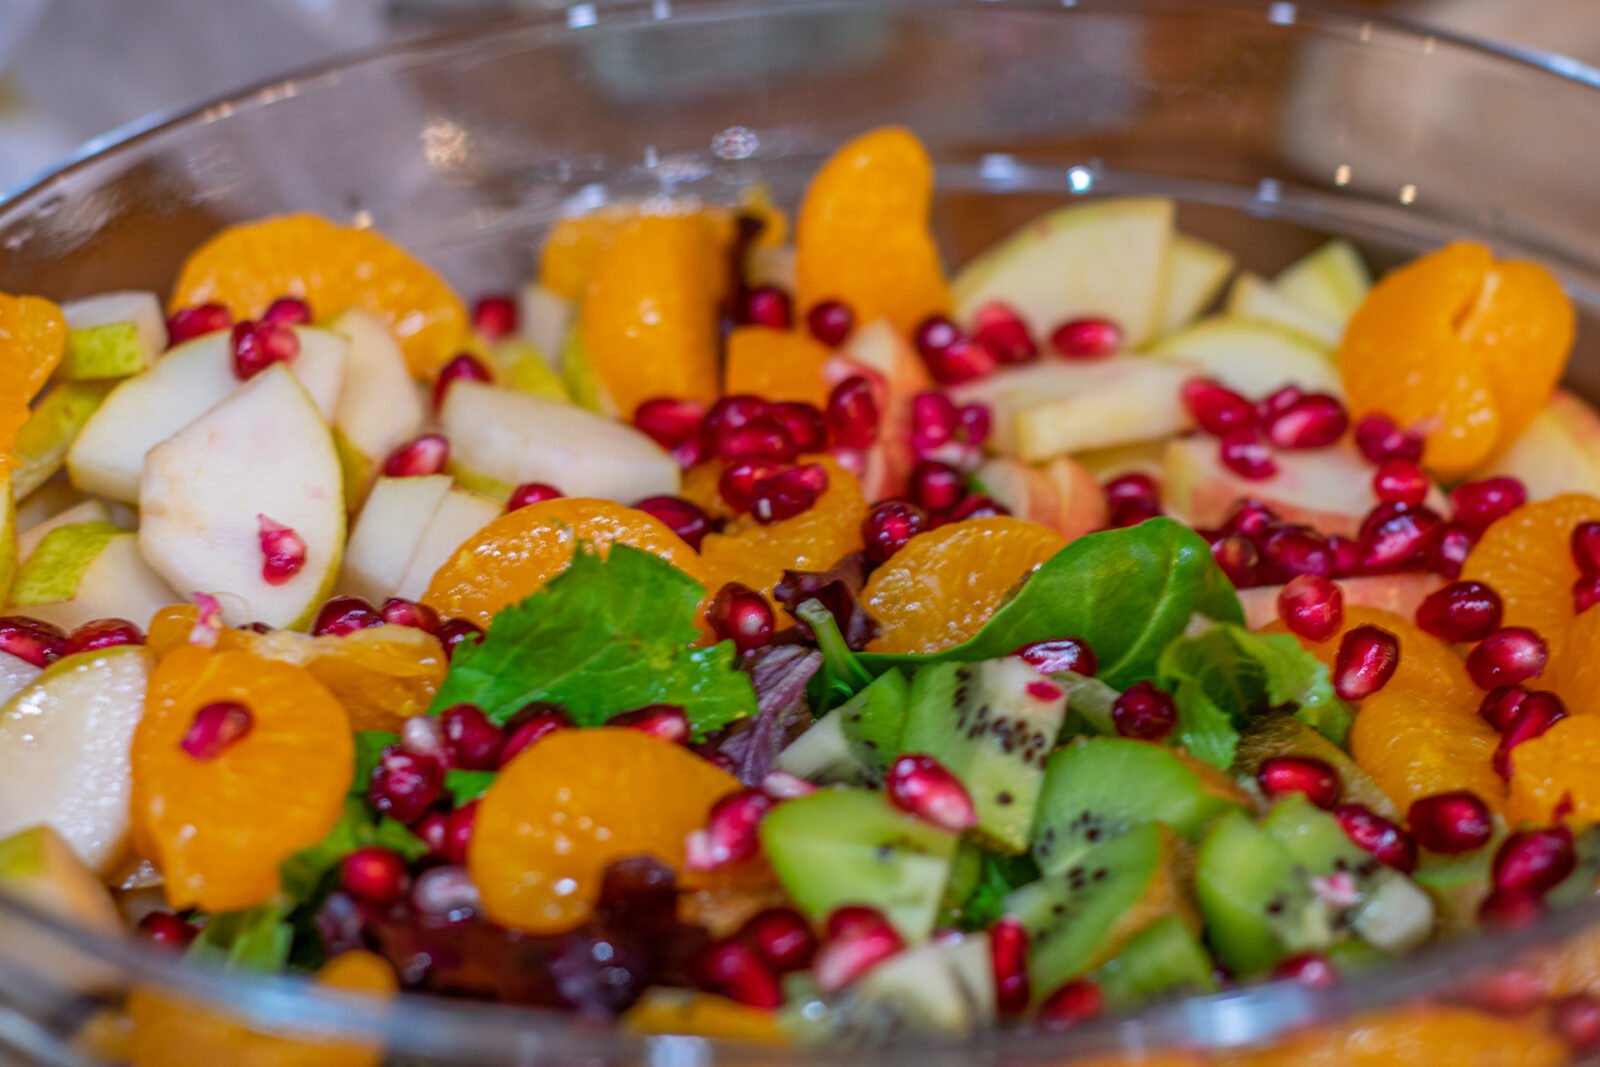 Picture of Winter Salad with Fruit ready to be tossed